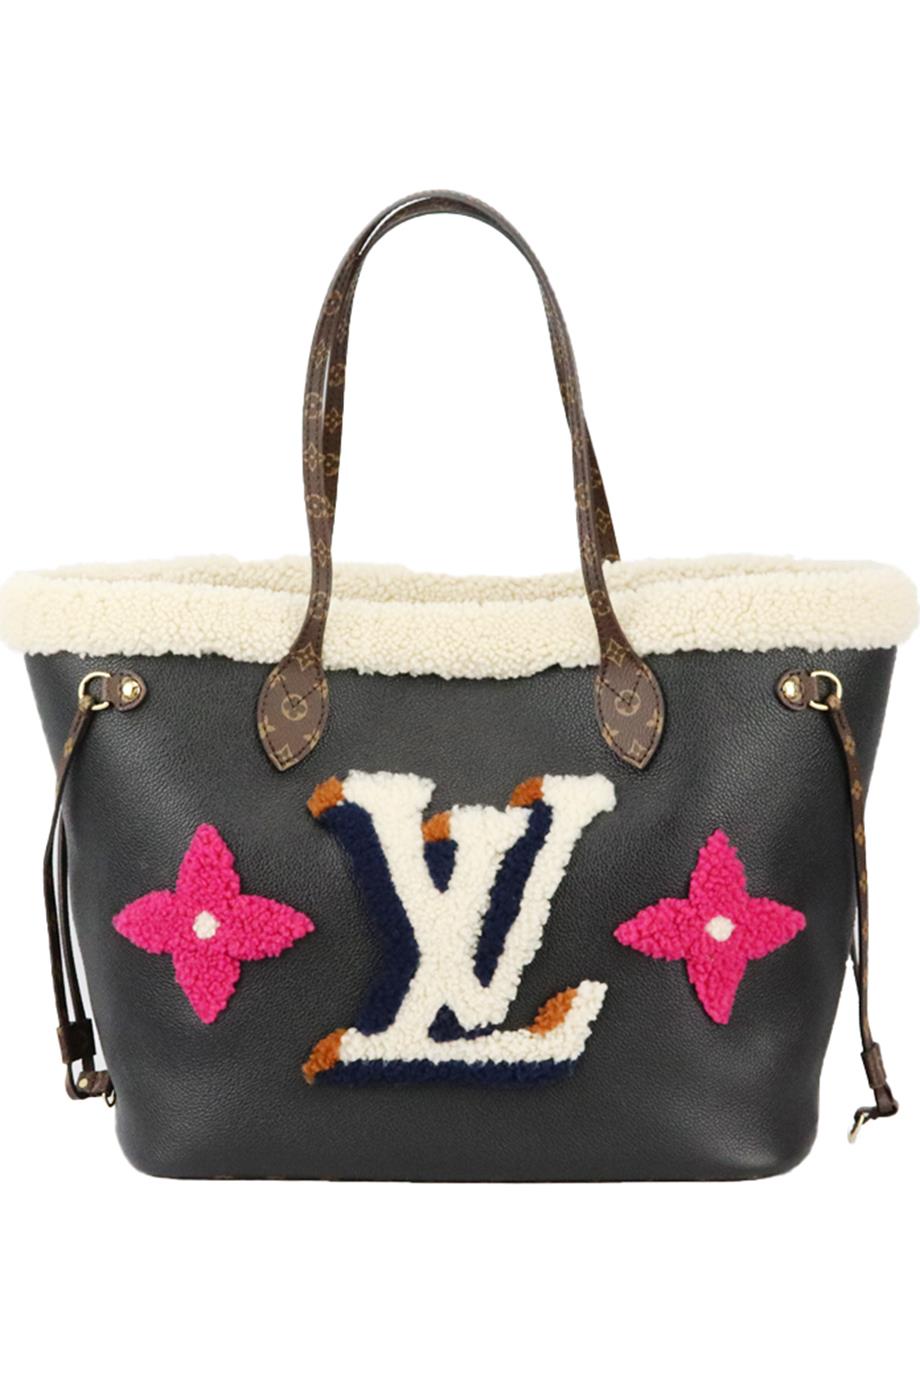 LOUIS VUITTON 2020 NEVERFULL MM MONOGRAM SHEARLING AND LEATHER BAG